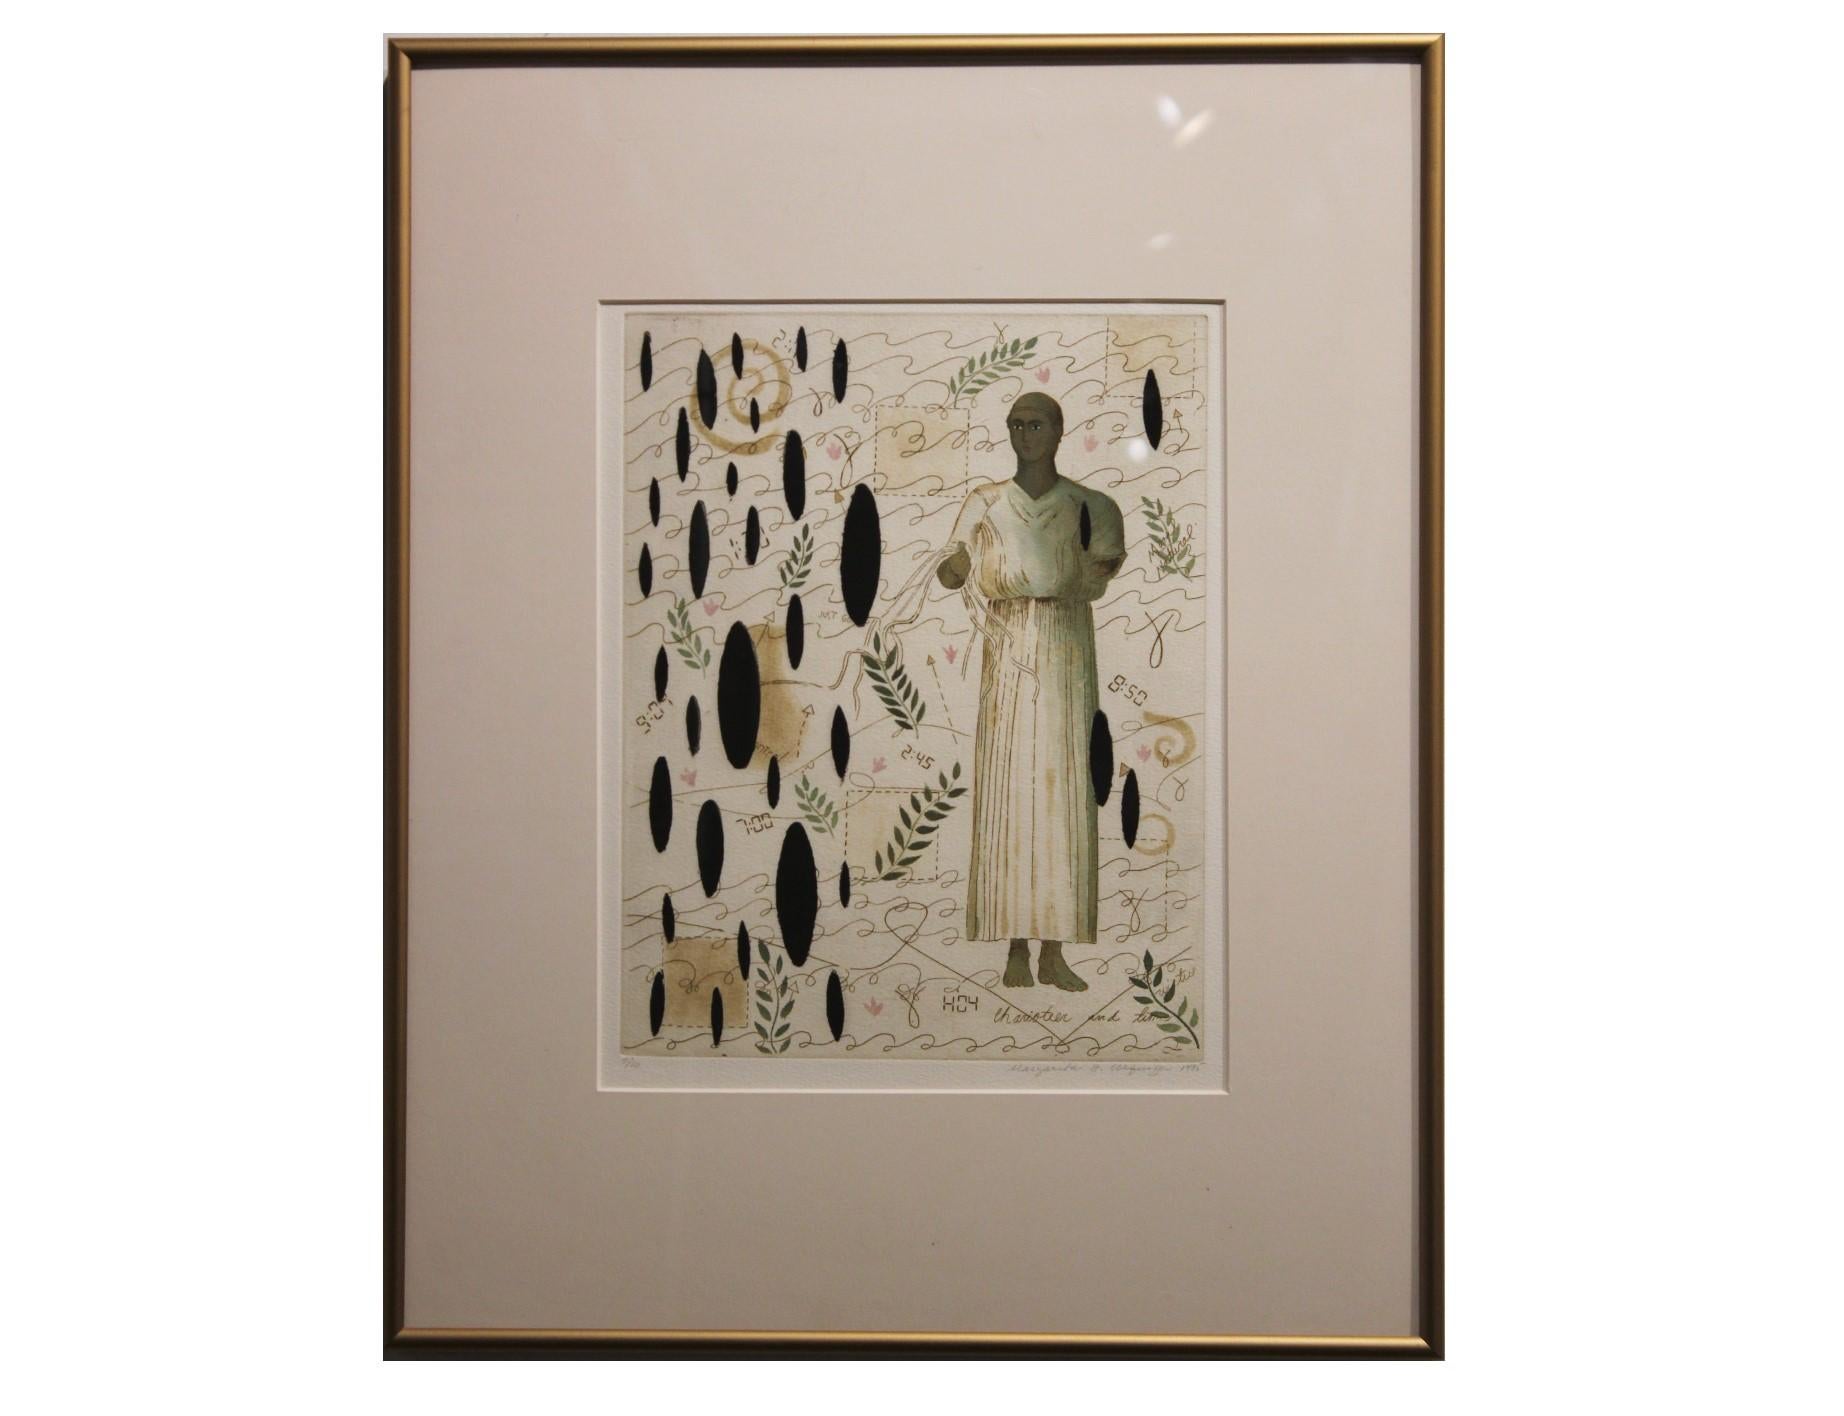 Margarita Urquiza Abstract Print - "Charioteer and Time" Roman Themed Print from the Delphi Series